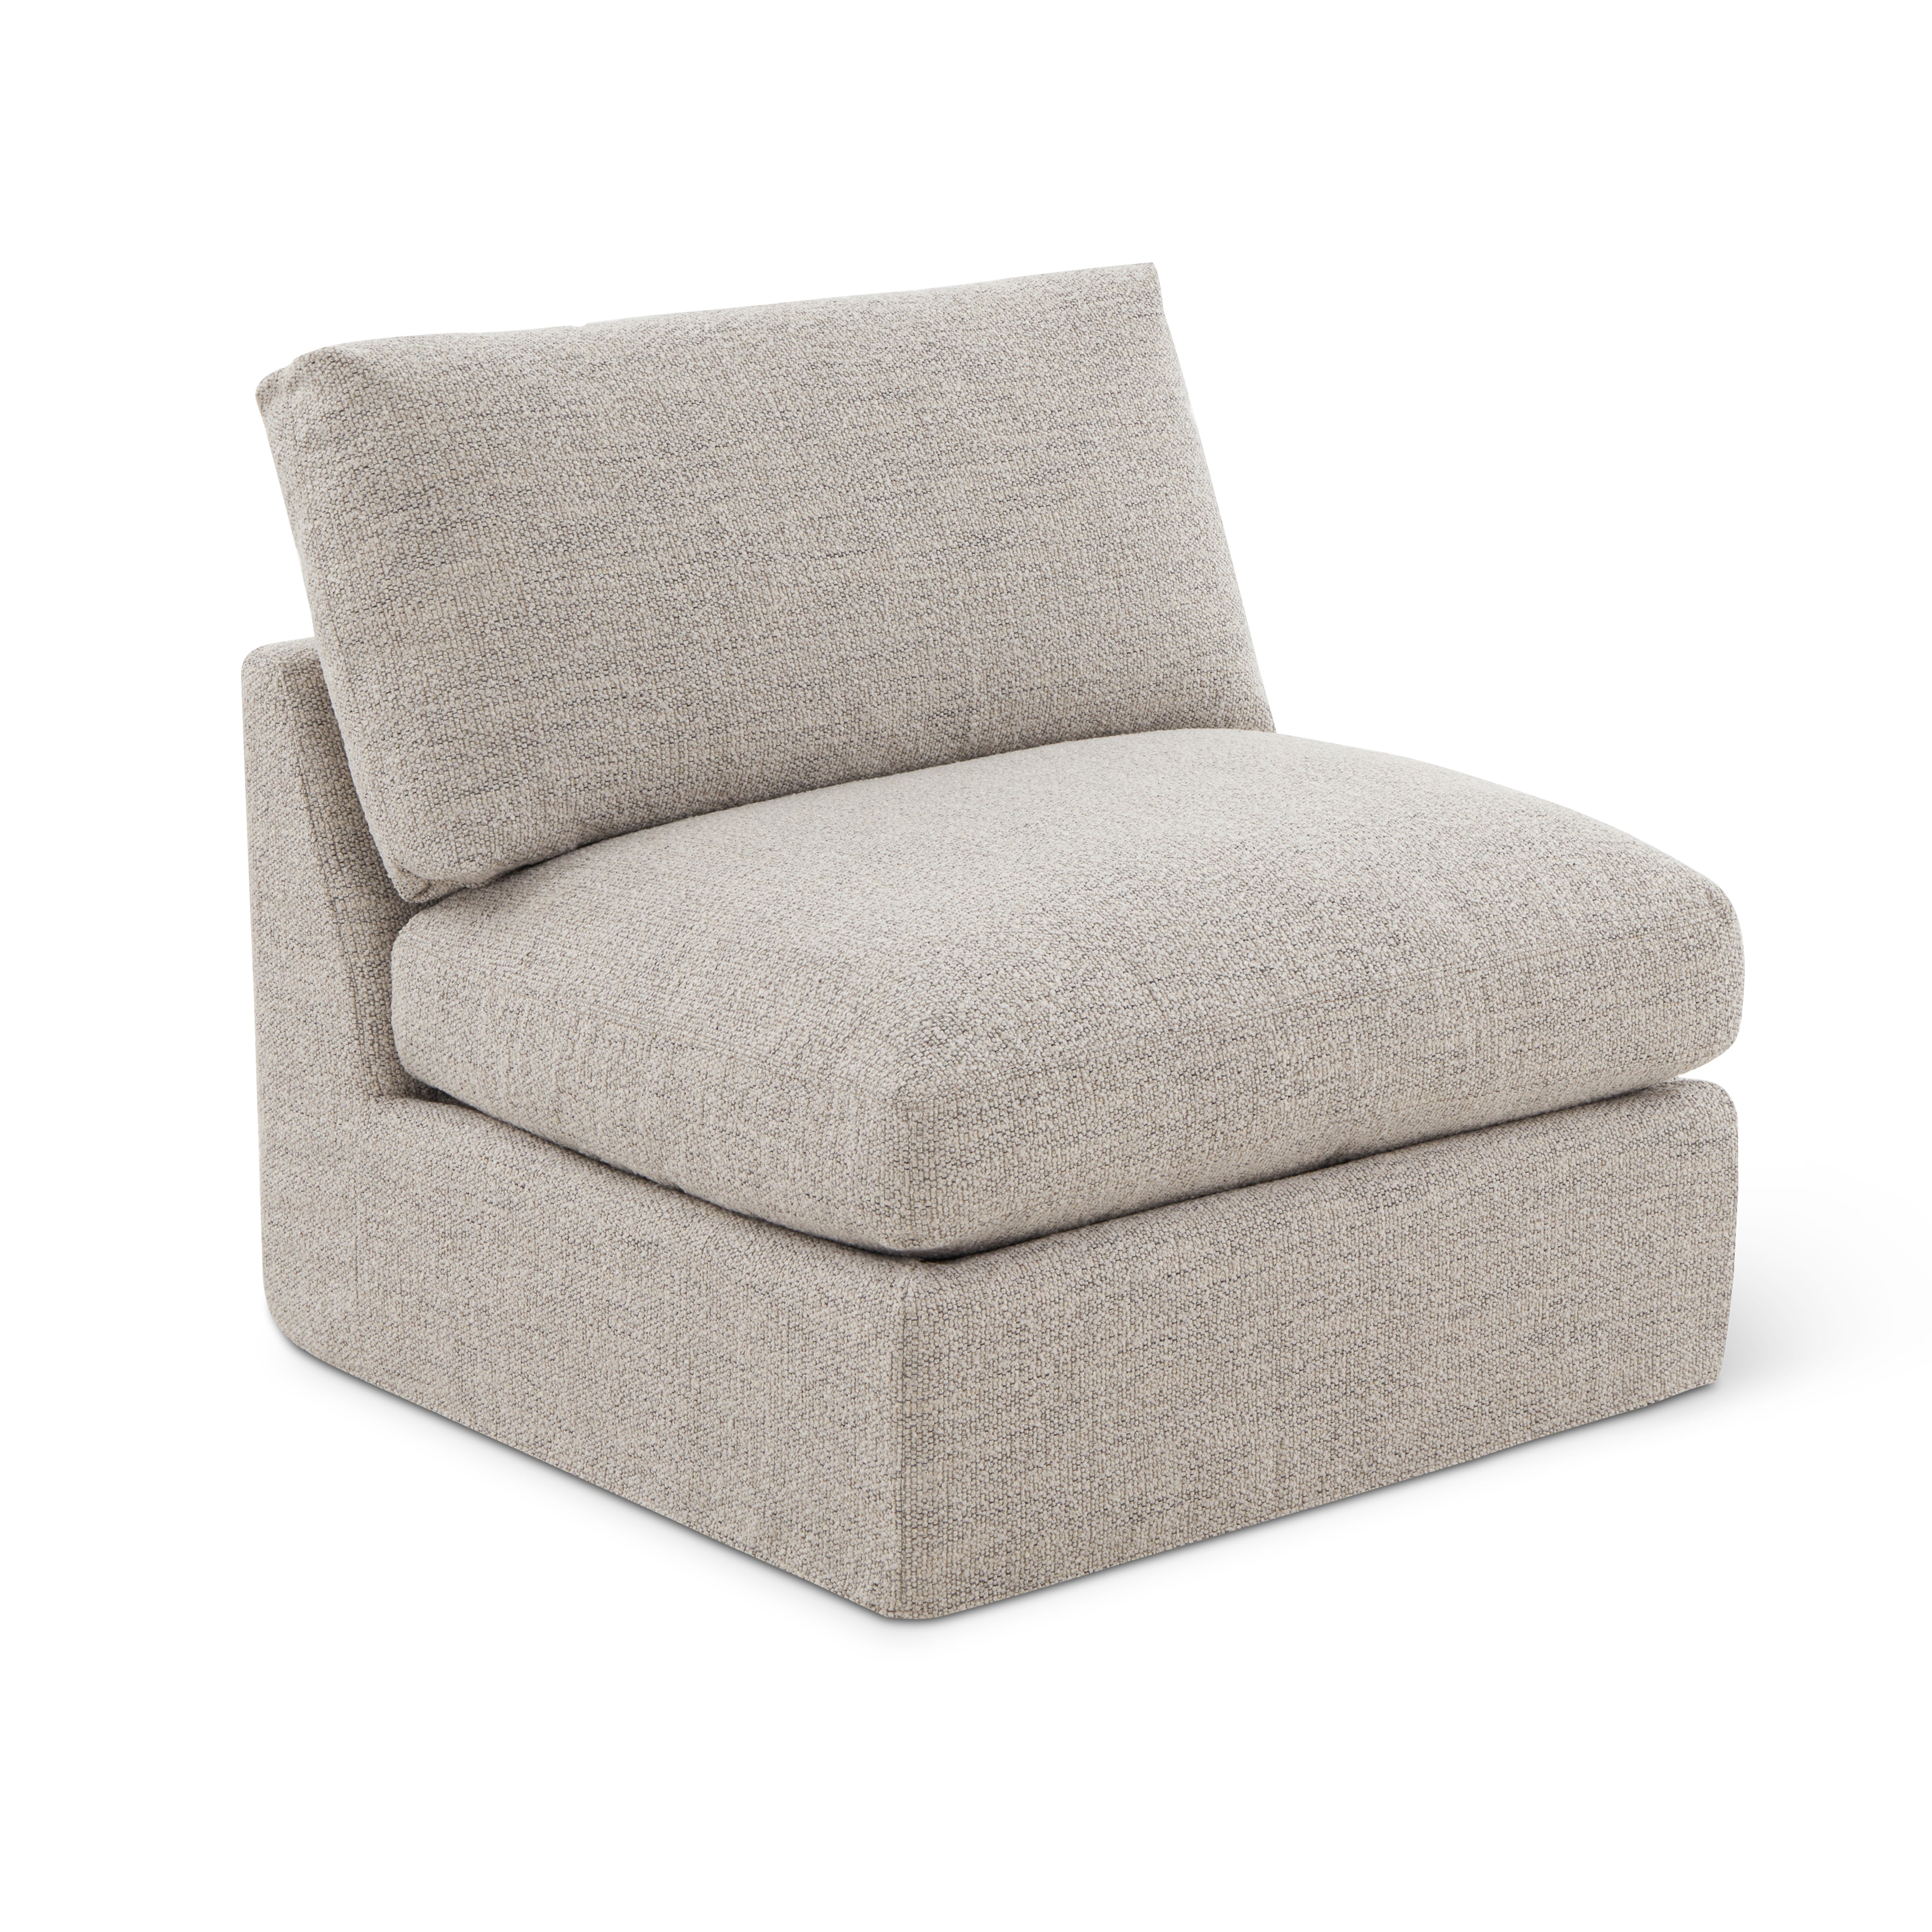 Get Together™ Armless Chair, Standard, Oatmeal - Image 10